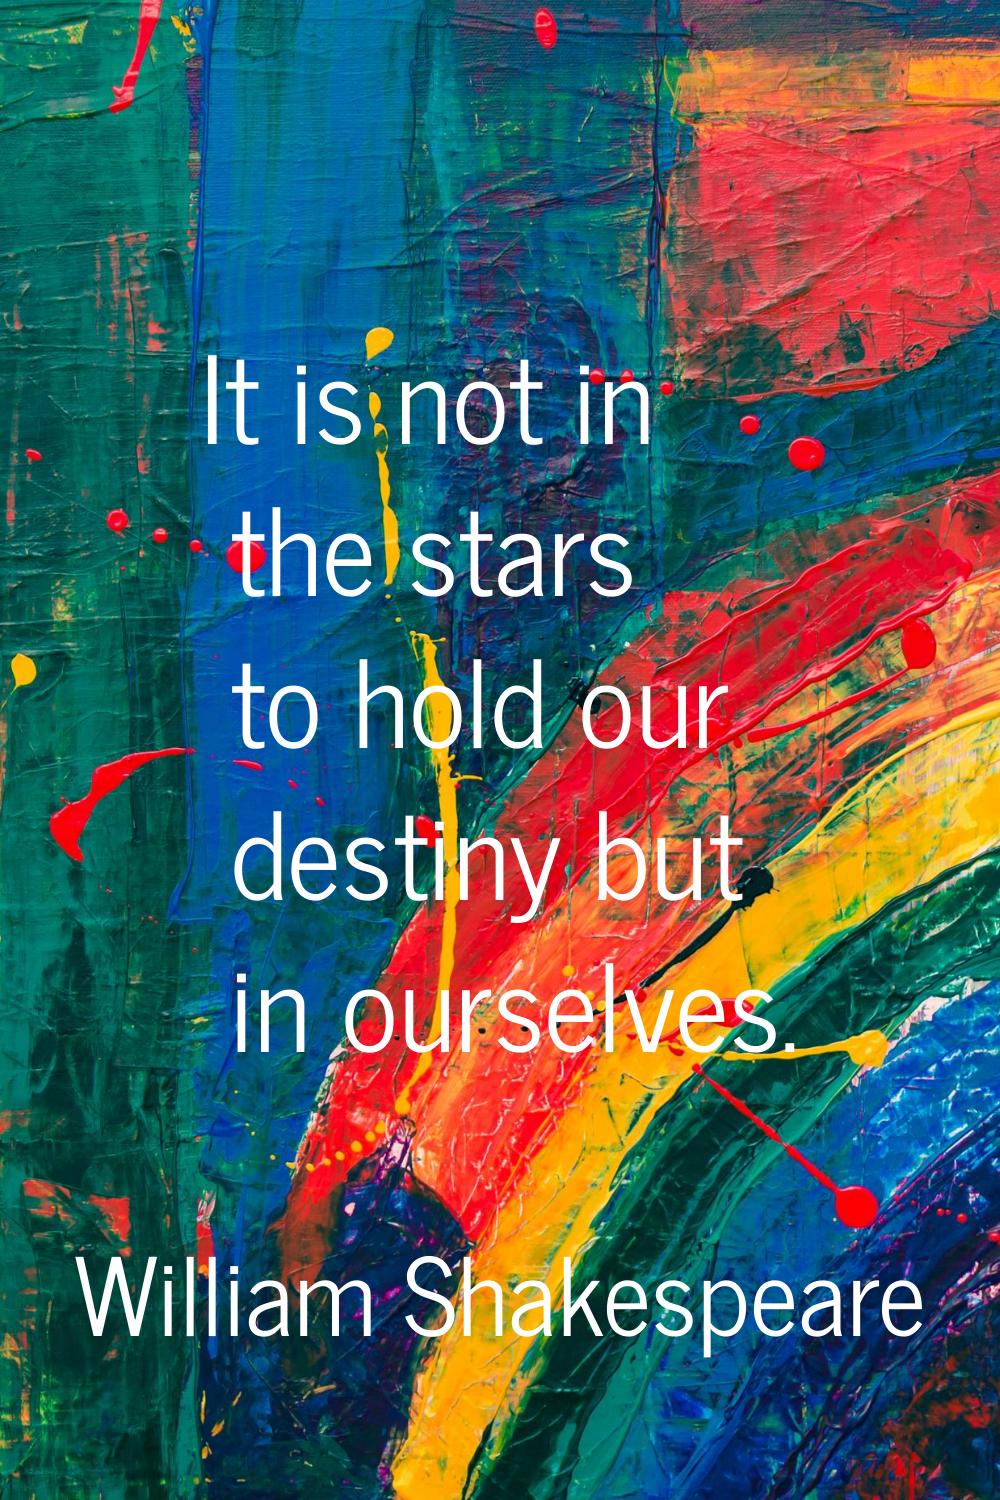 It is not in the stars to hold our destiny but in ourselves.